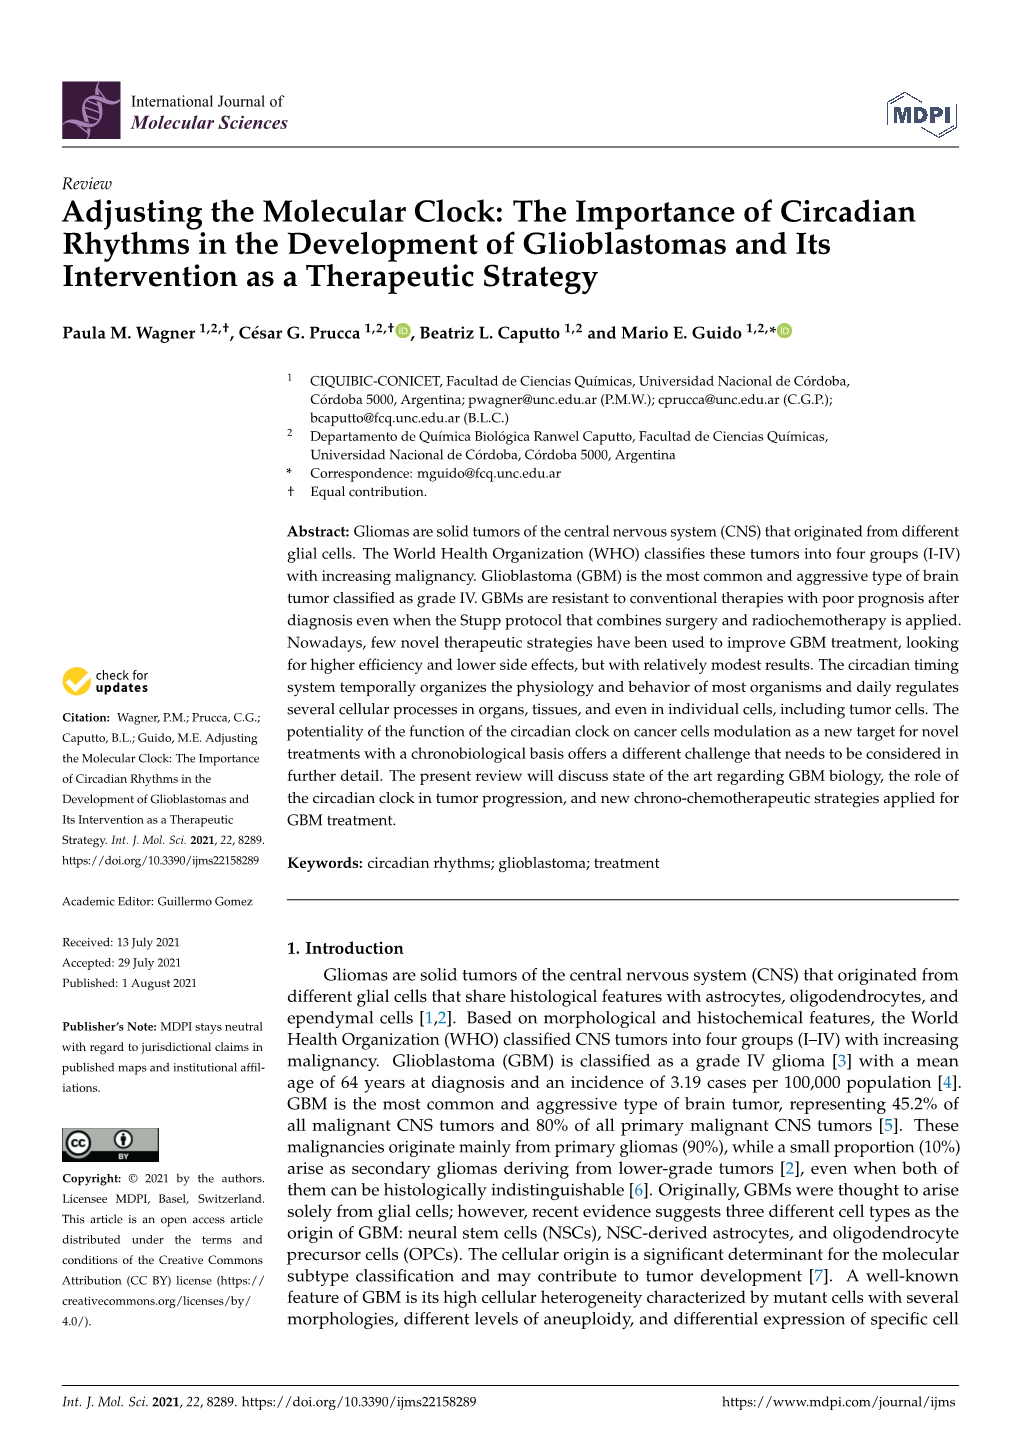 Adjusting the Molecular Clock: the Importance of Circadian Rhythms in the Development of Glioblastomas and Its Intervention As a Therapeutic Strategy